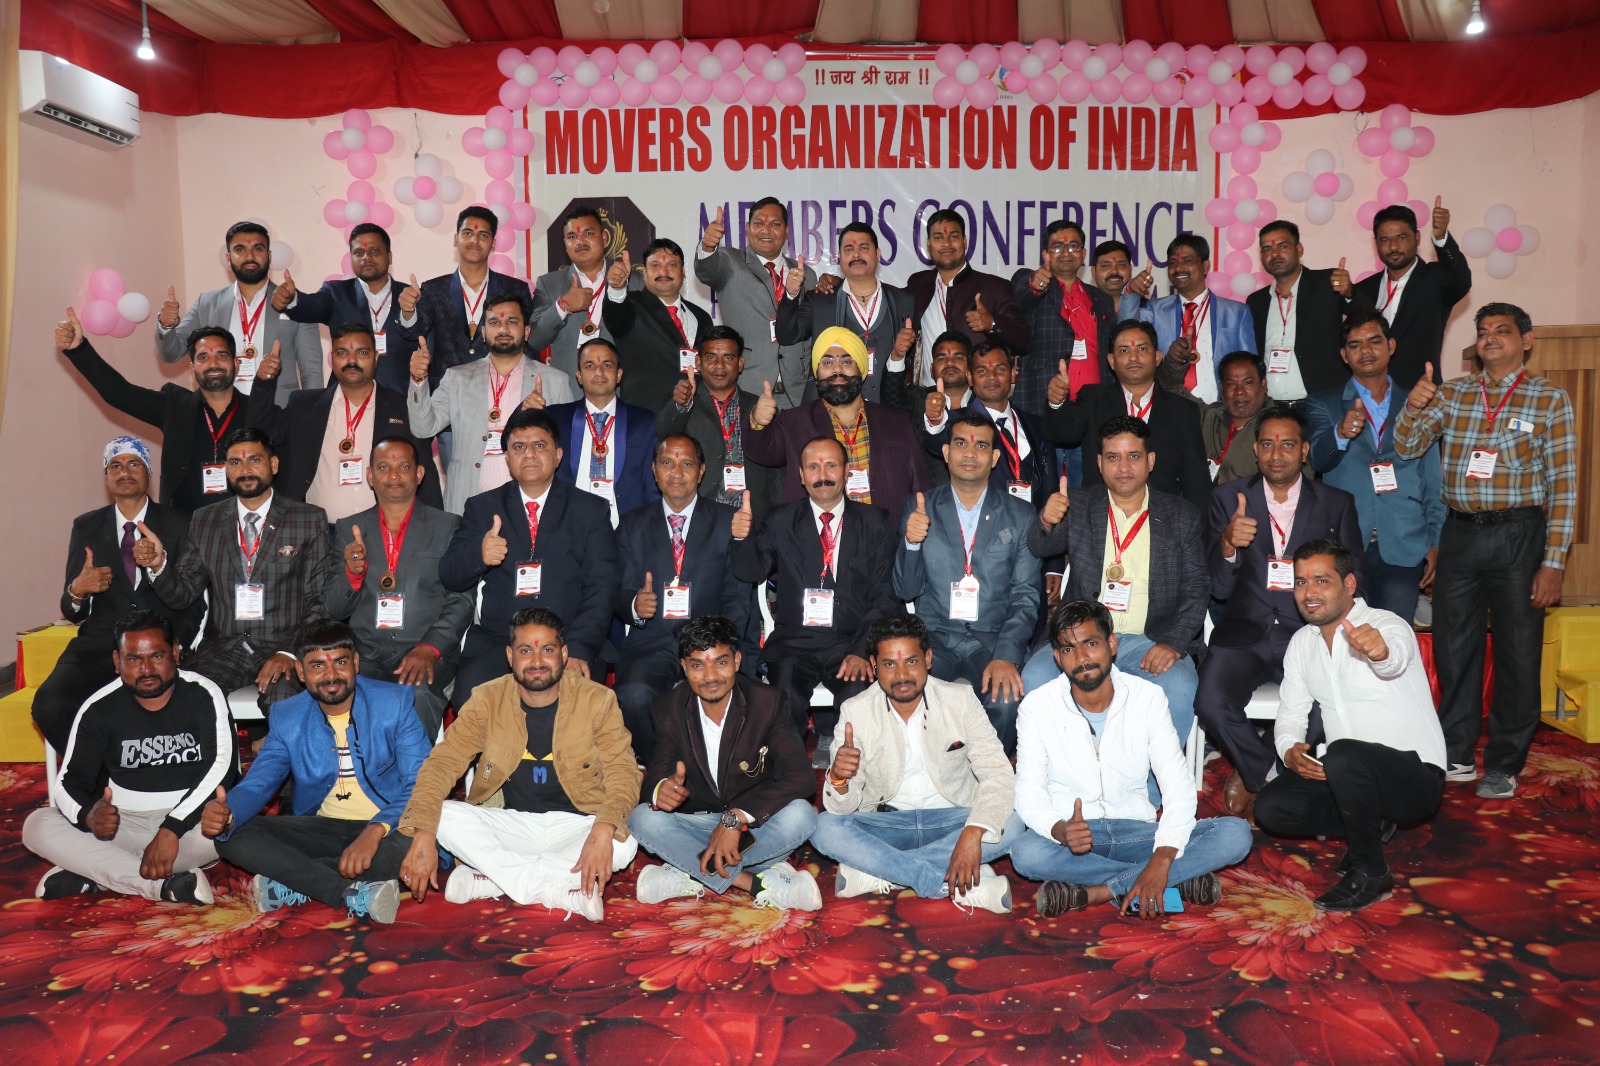 Members of Movers Organization of India